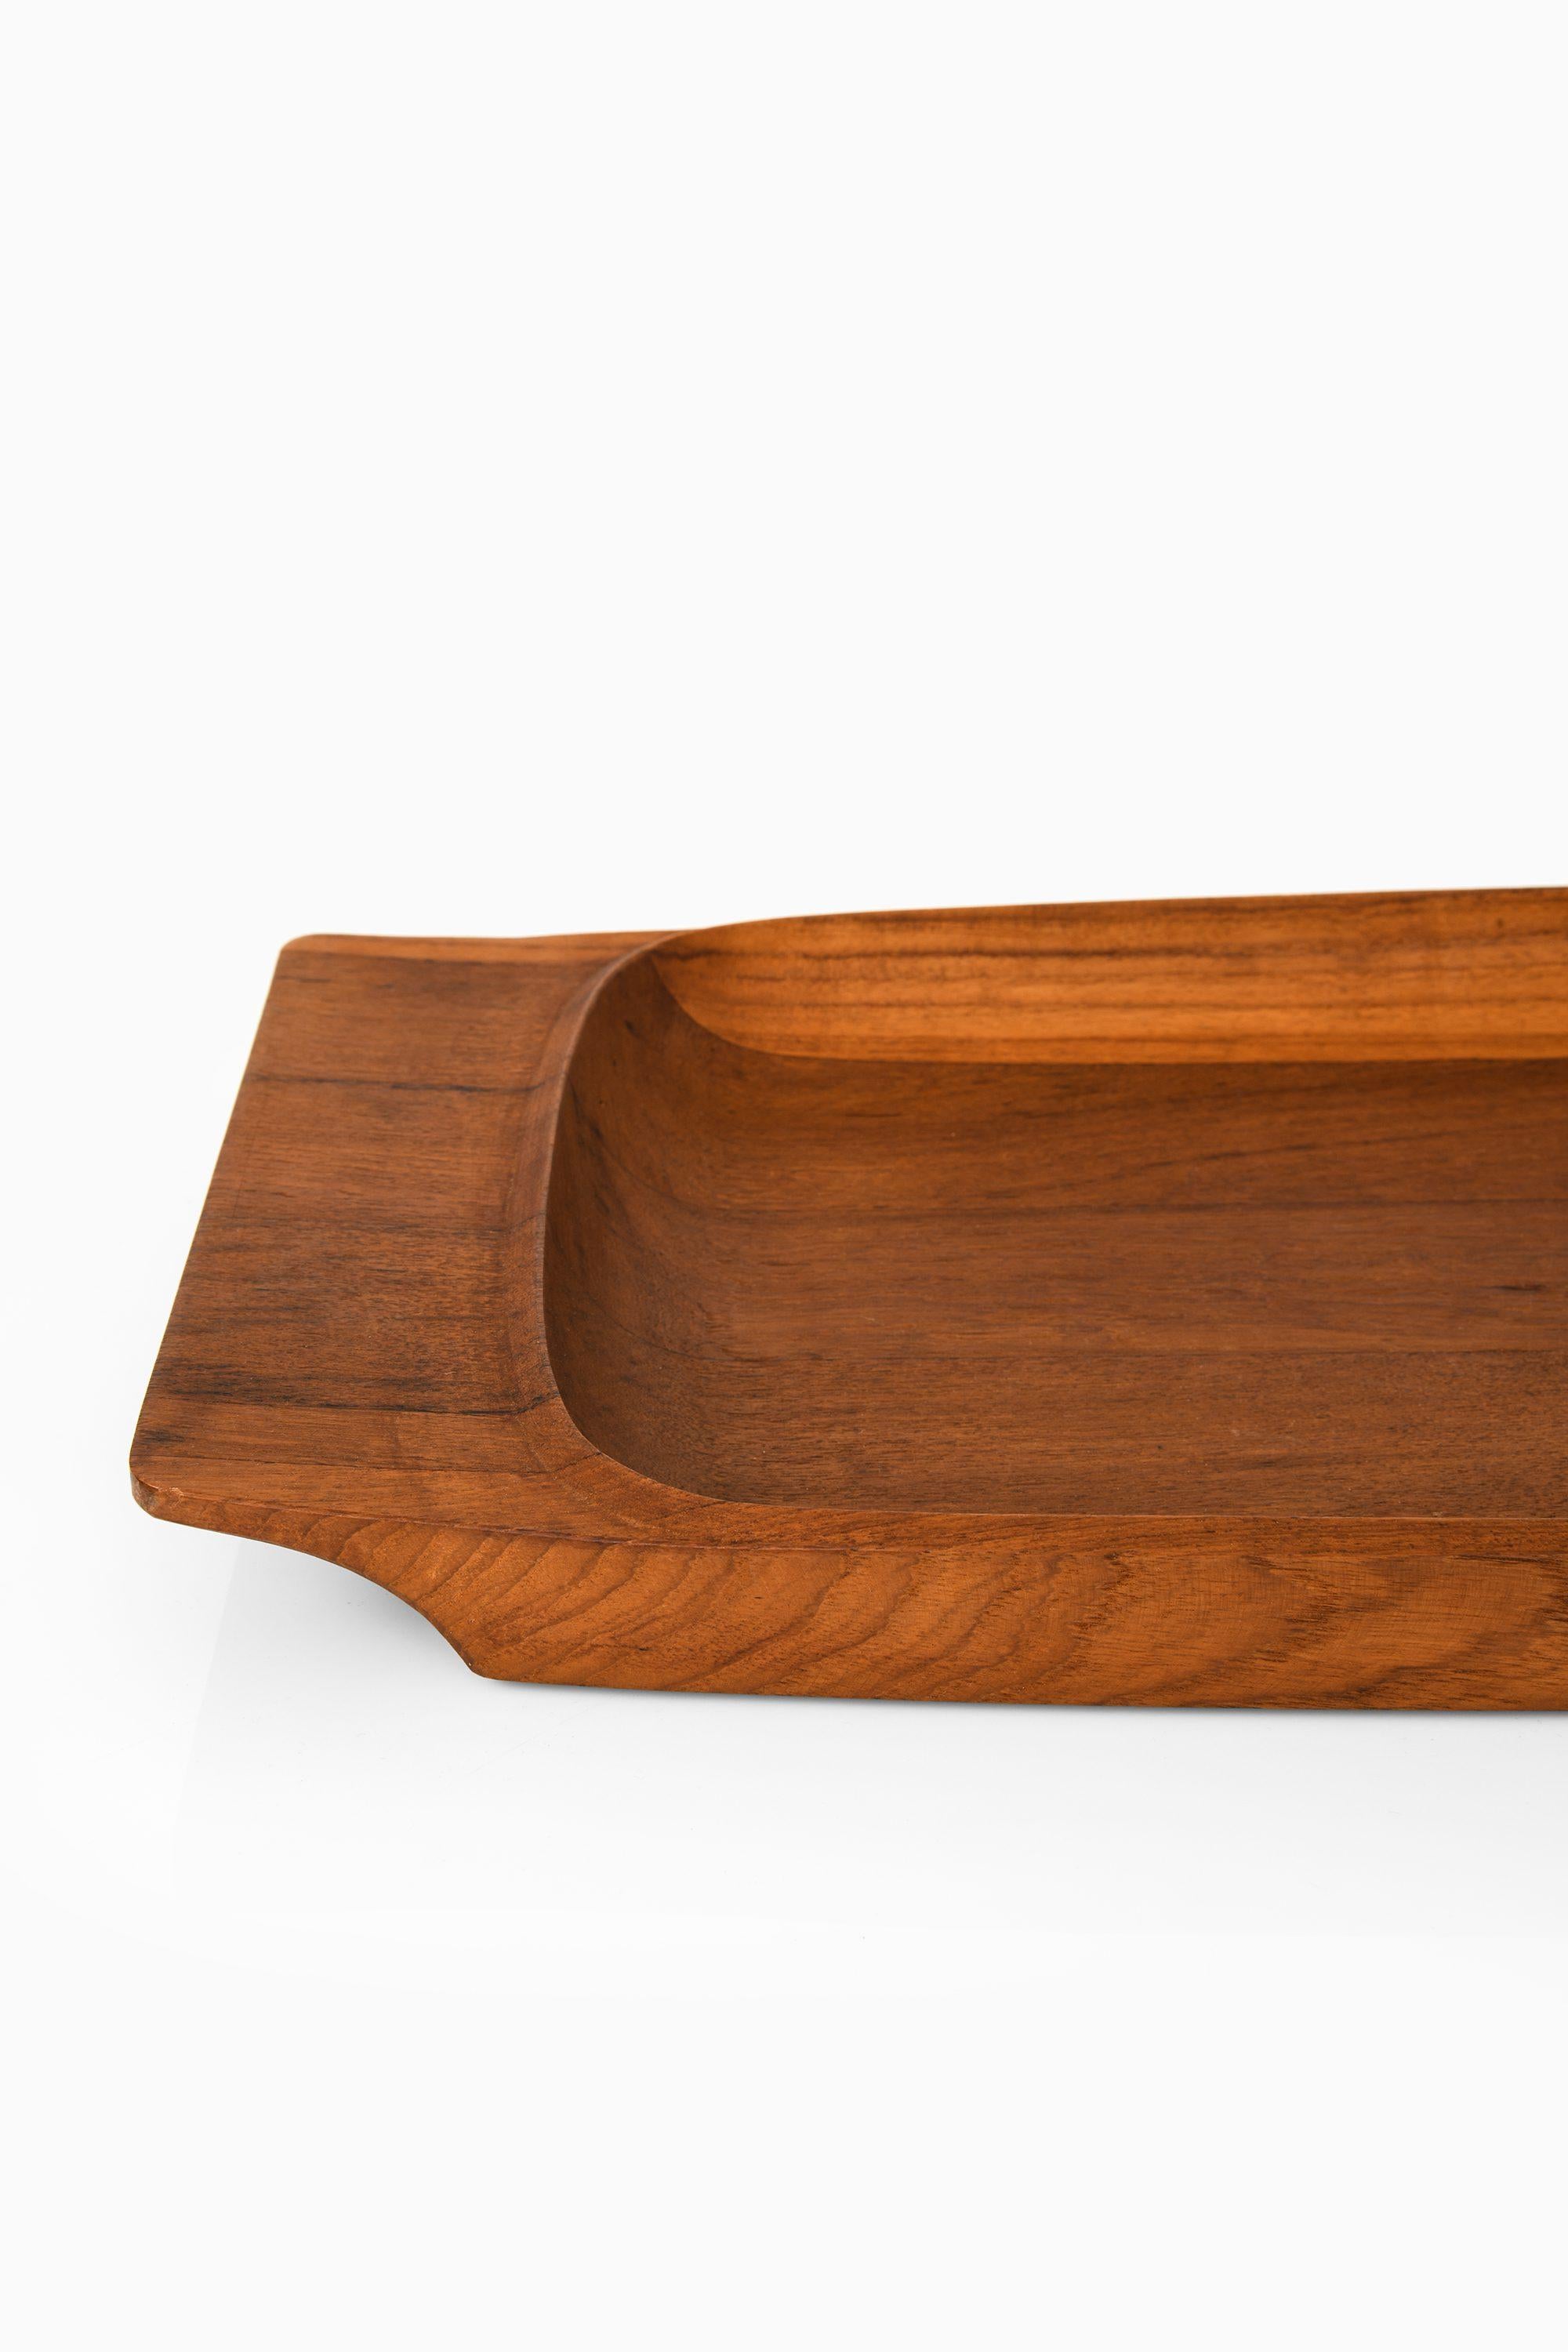 Danish Serving Tray in Teak by Jens Quistgaard, 1950's For Sale